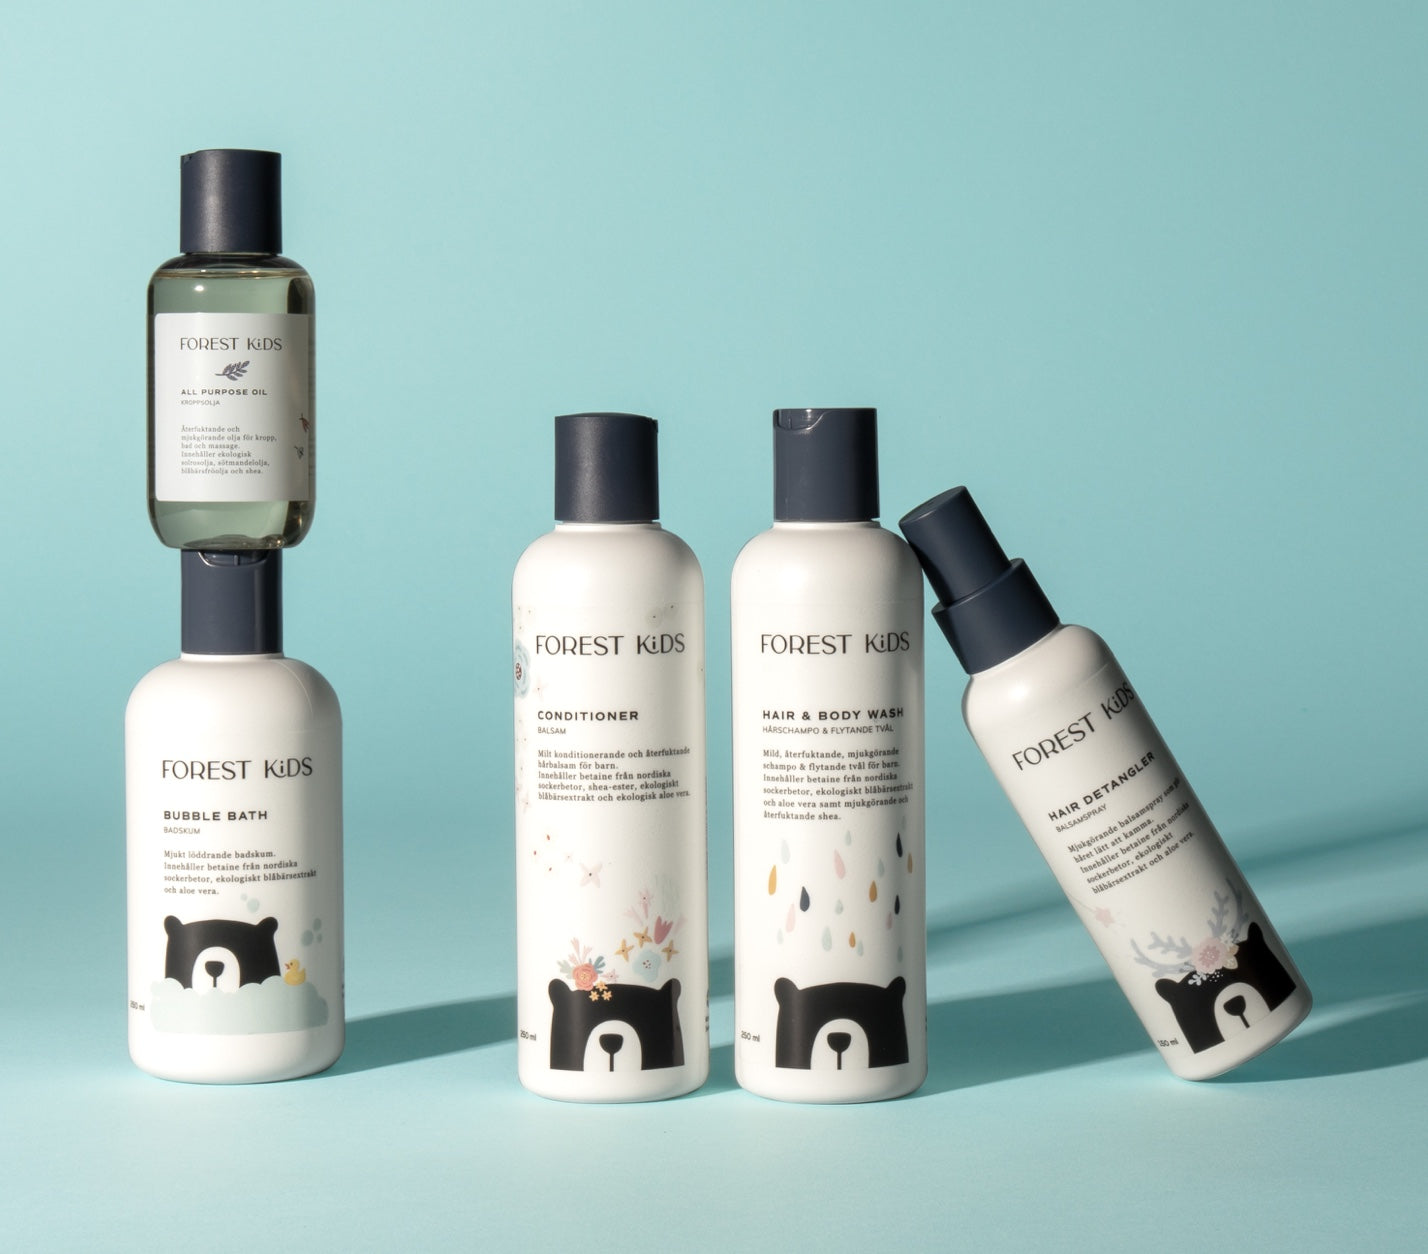 The Forest Kids Everything Ritual bundle, including the complete line of Forest Kids products. Bubble bath, Hair & Body Wash, Conditioner, Hair Detangler and All purpose Oil.